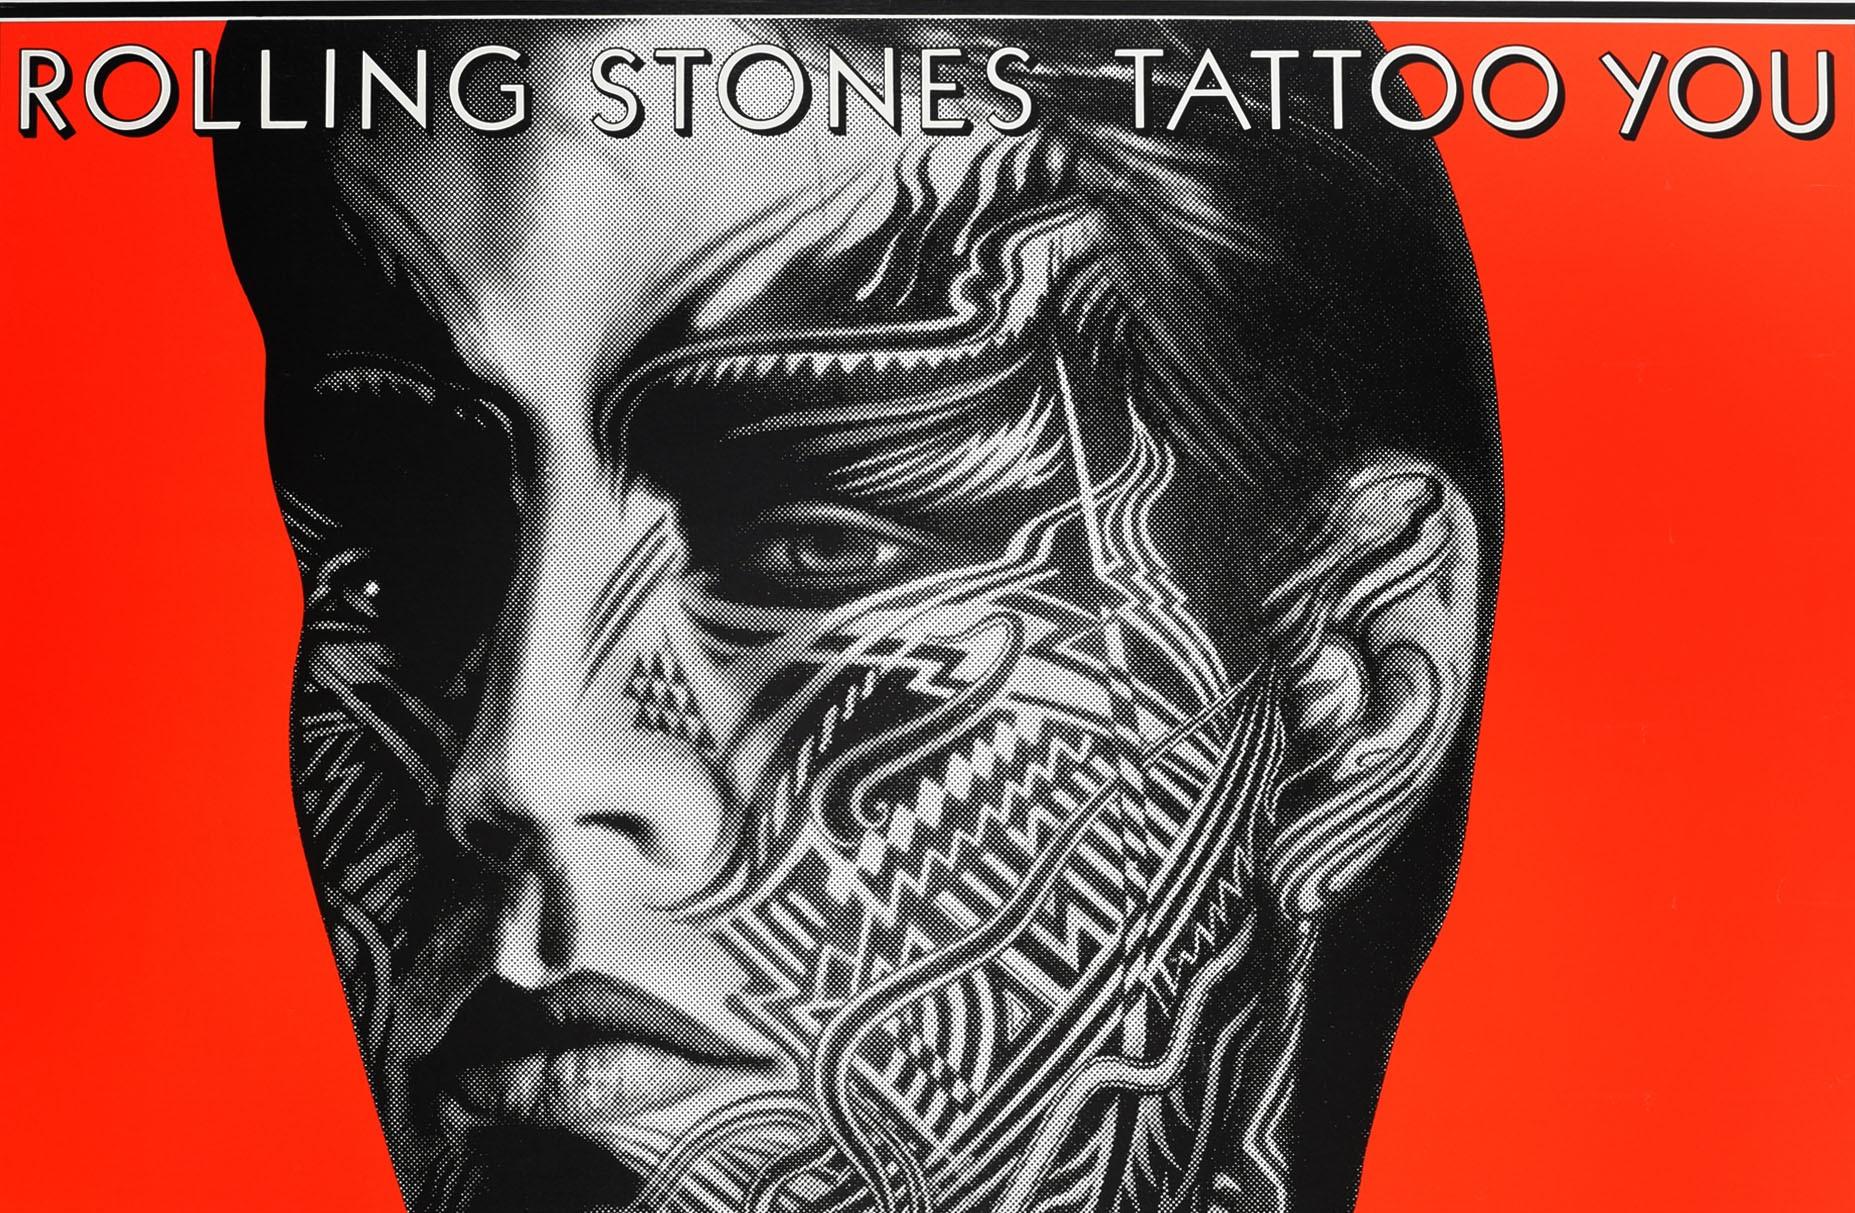 Original vintage music advertising poster for tattoo You by the Rolling Stones featuring the award winning album cover design by the graphic designer Peter Corriston working with photographer Hubert Kretzschmar and illustrator Christian piper